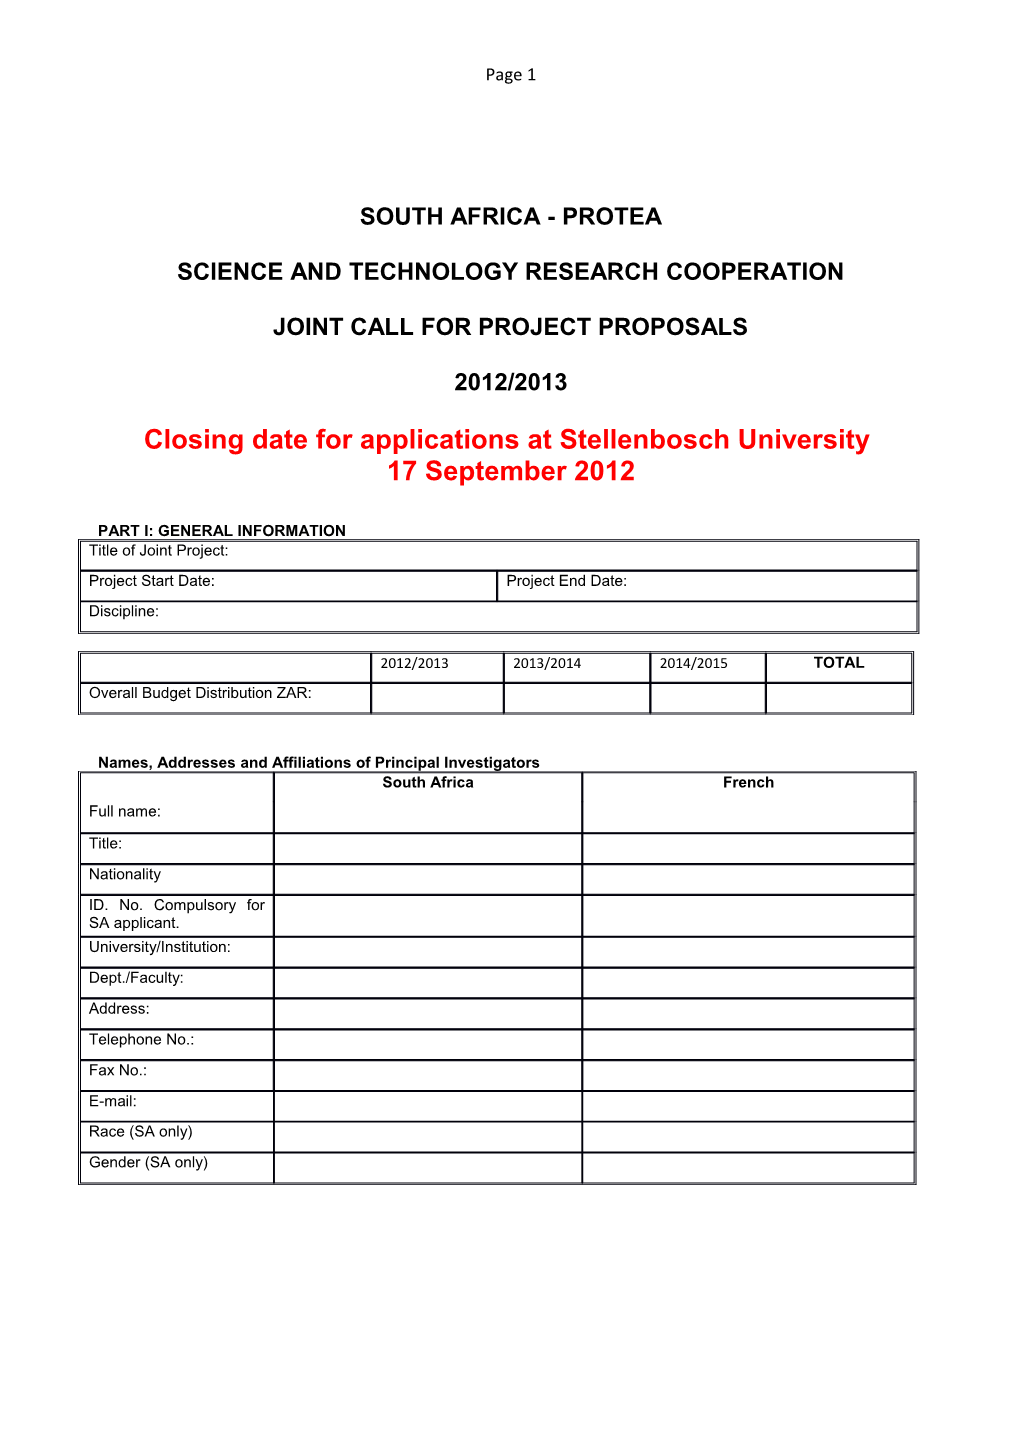 Science and Technology Research Cooperation